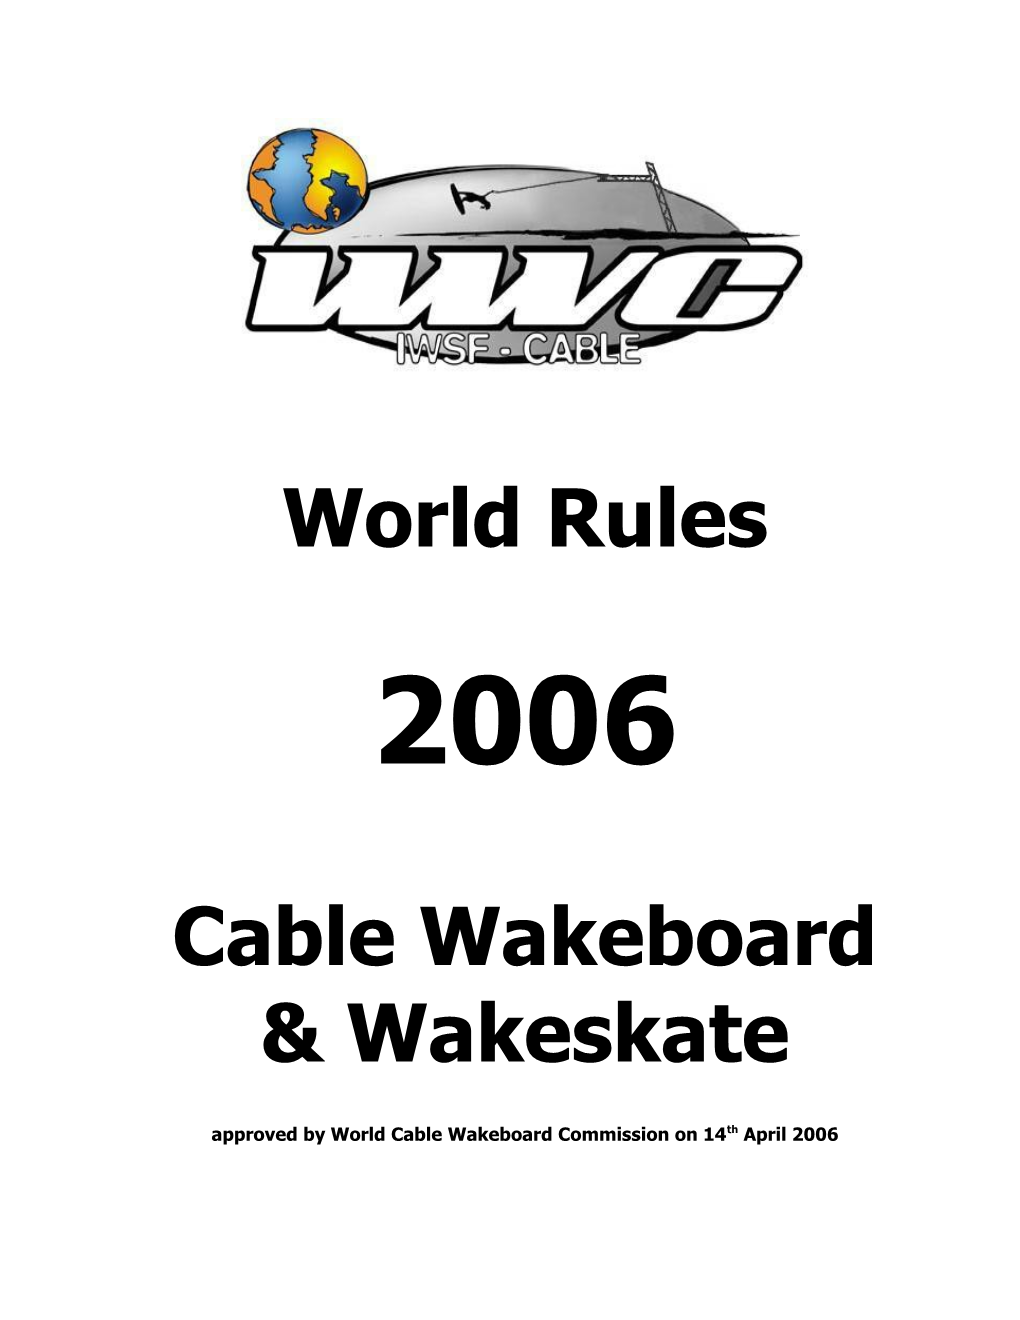 WCWC Cable Wakeboard Rules 2006